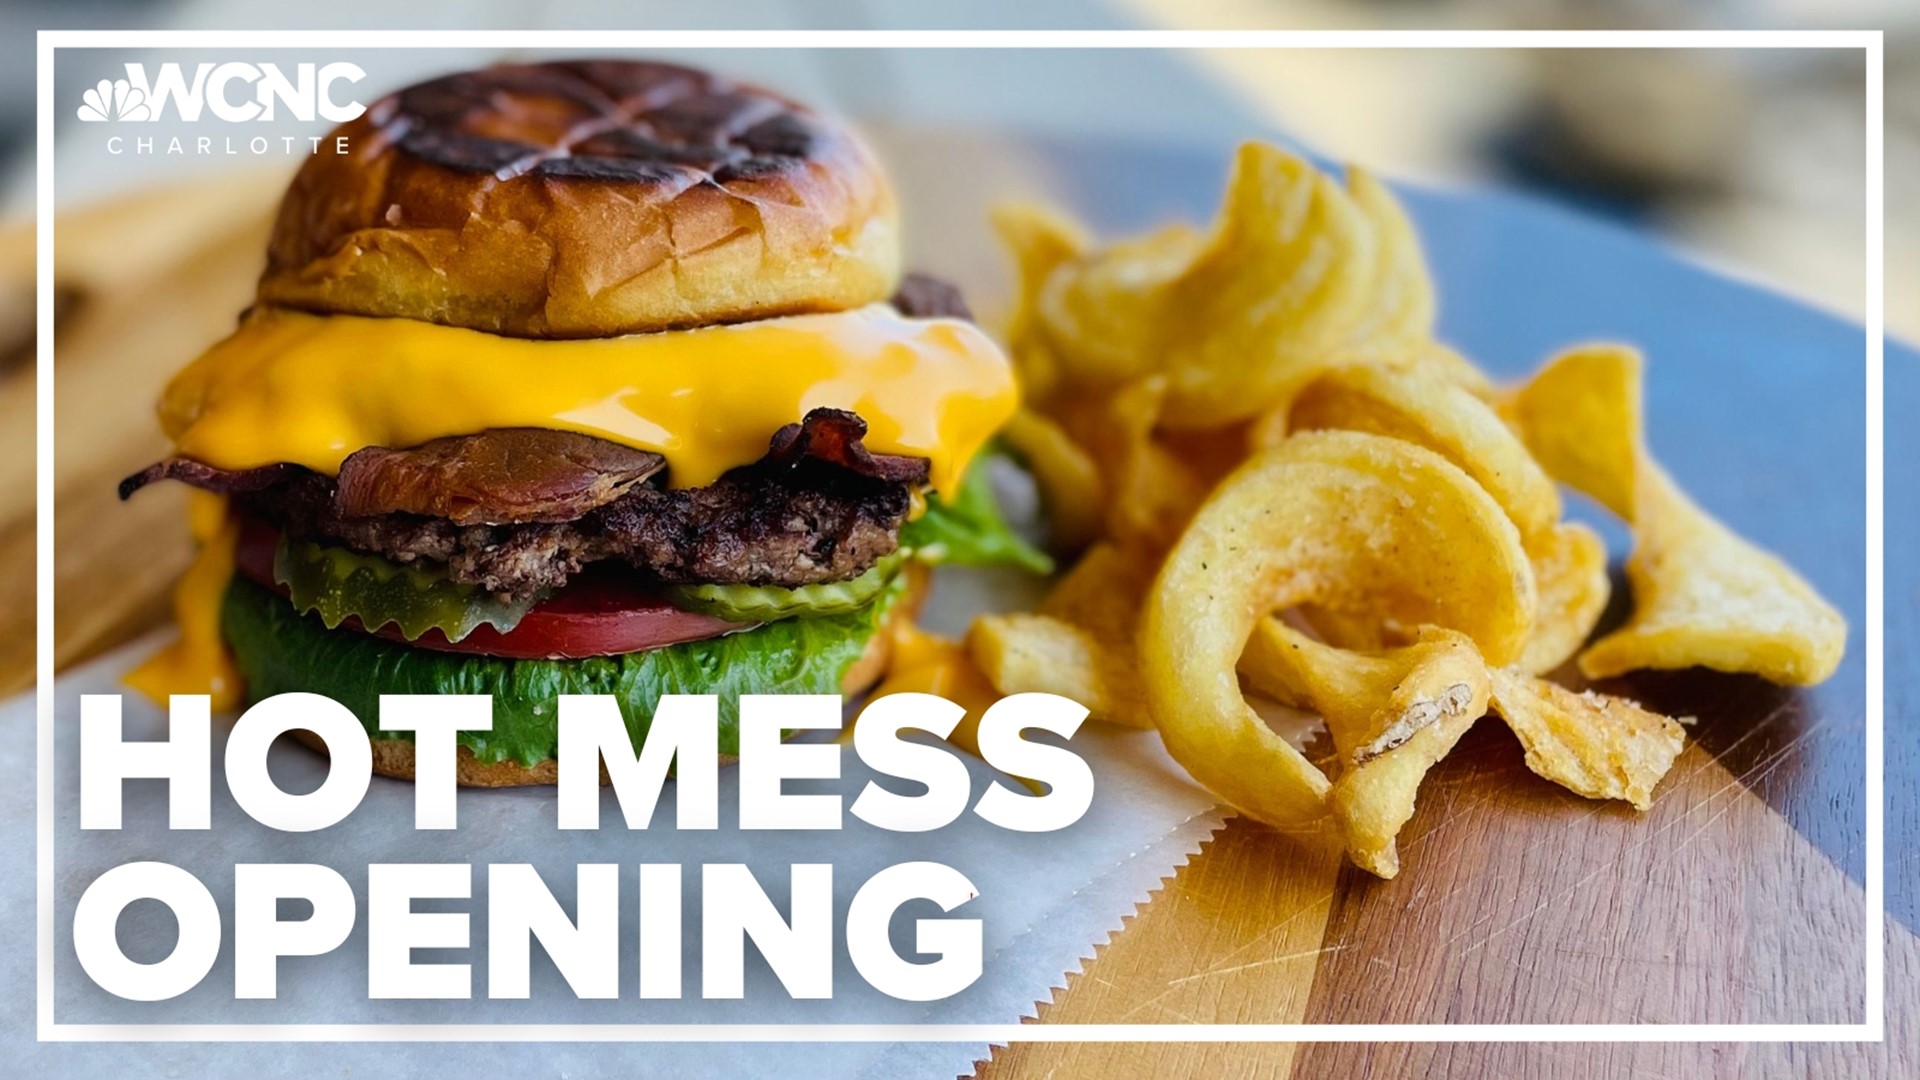 The former home of Davidson Ice House is now reopening as a restaurant called Hot Mess.